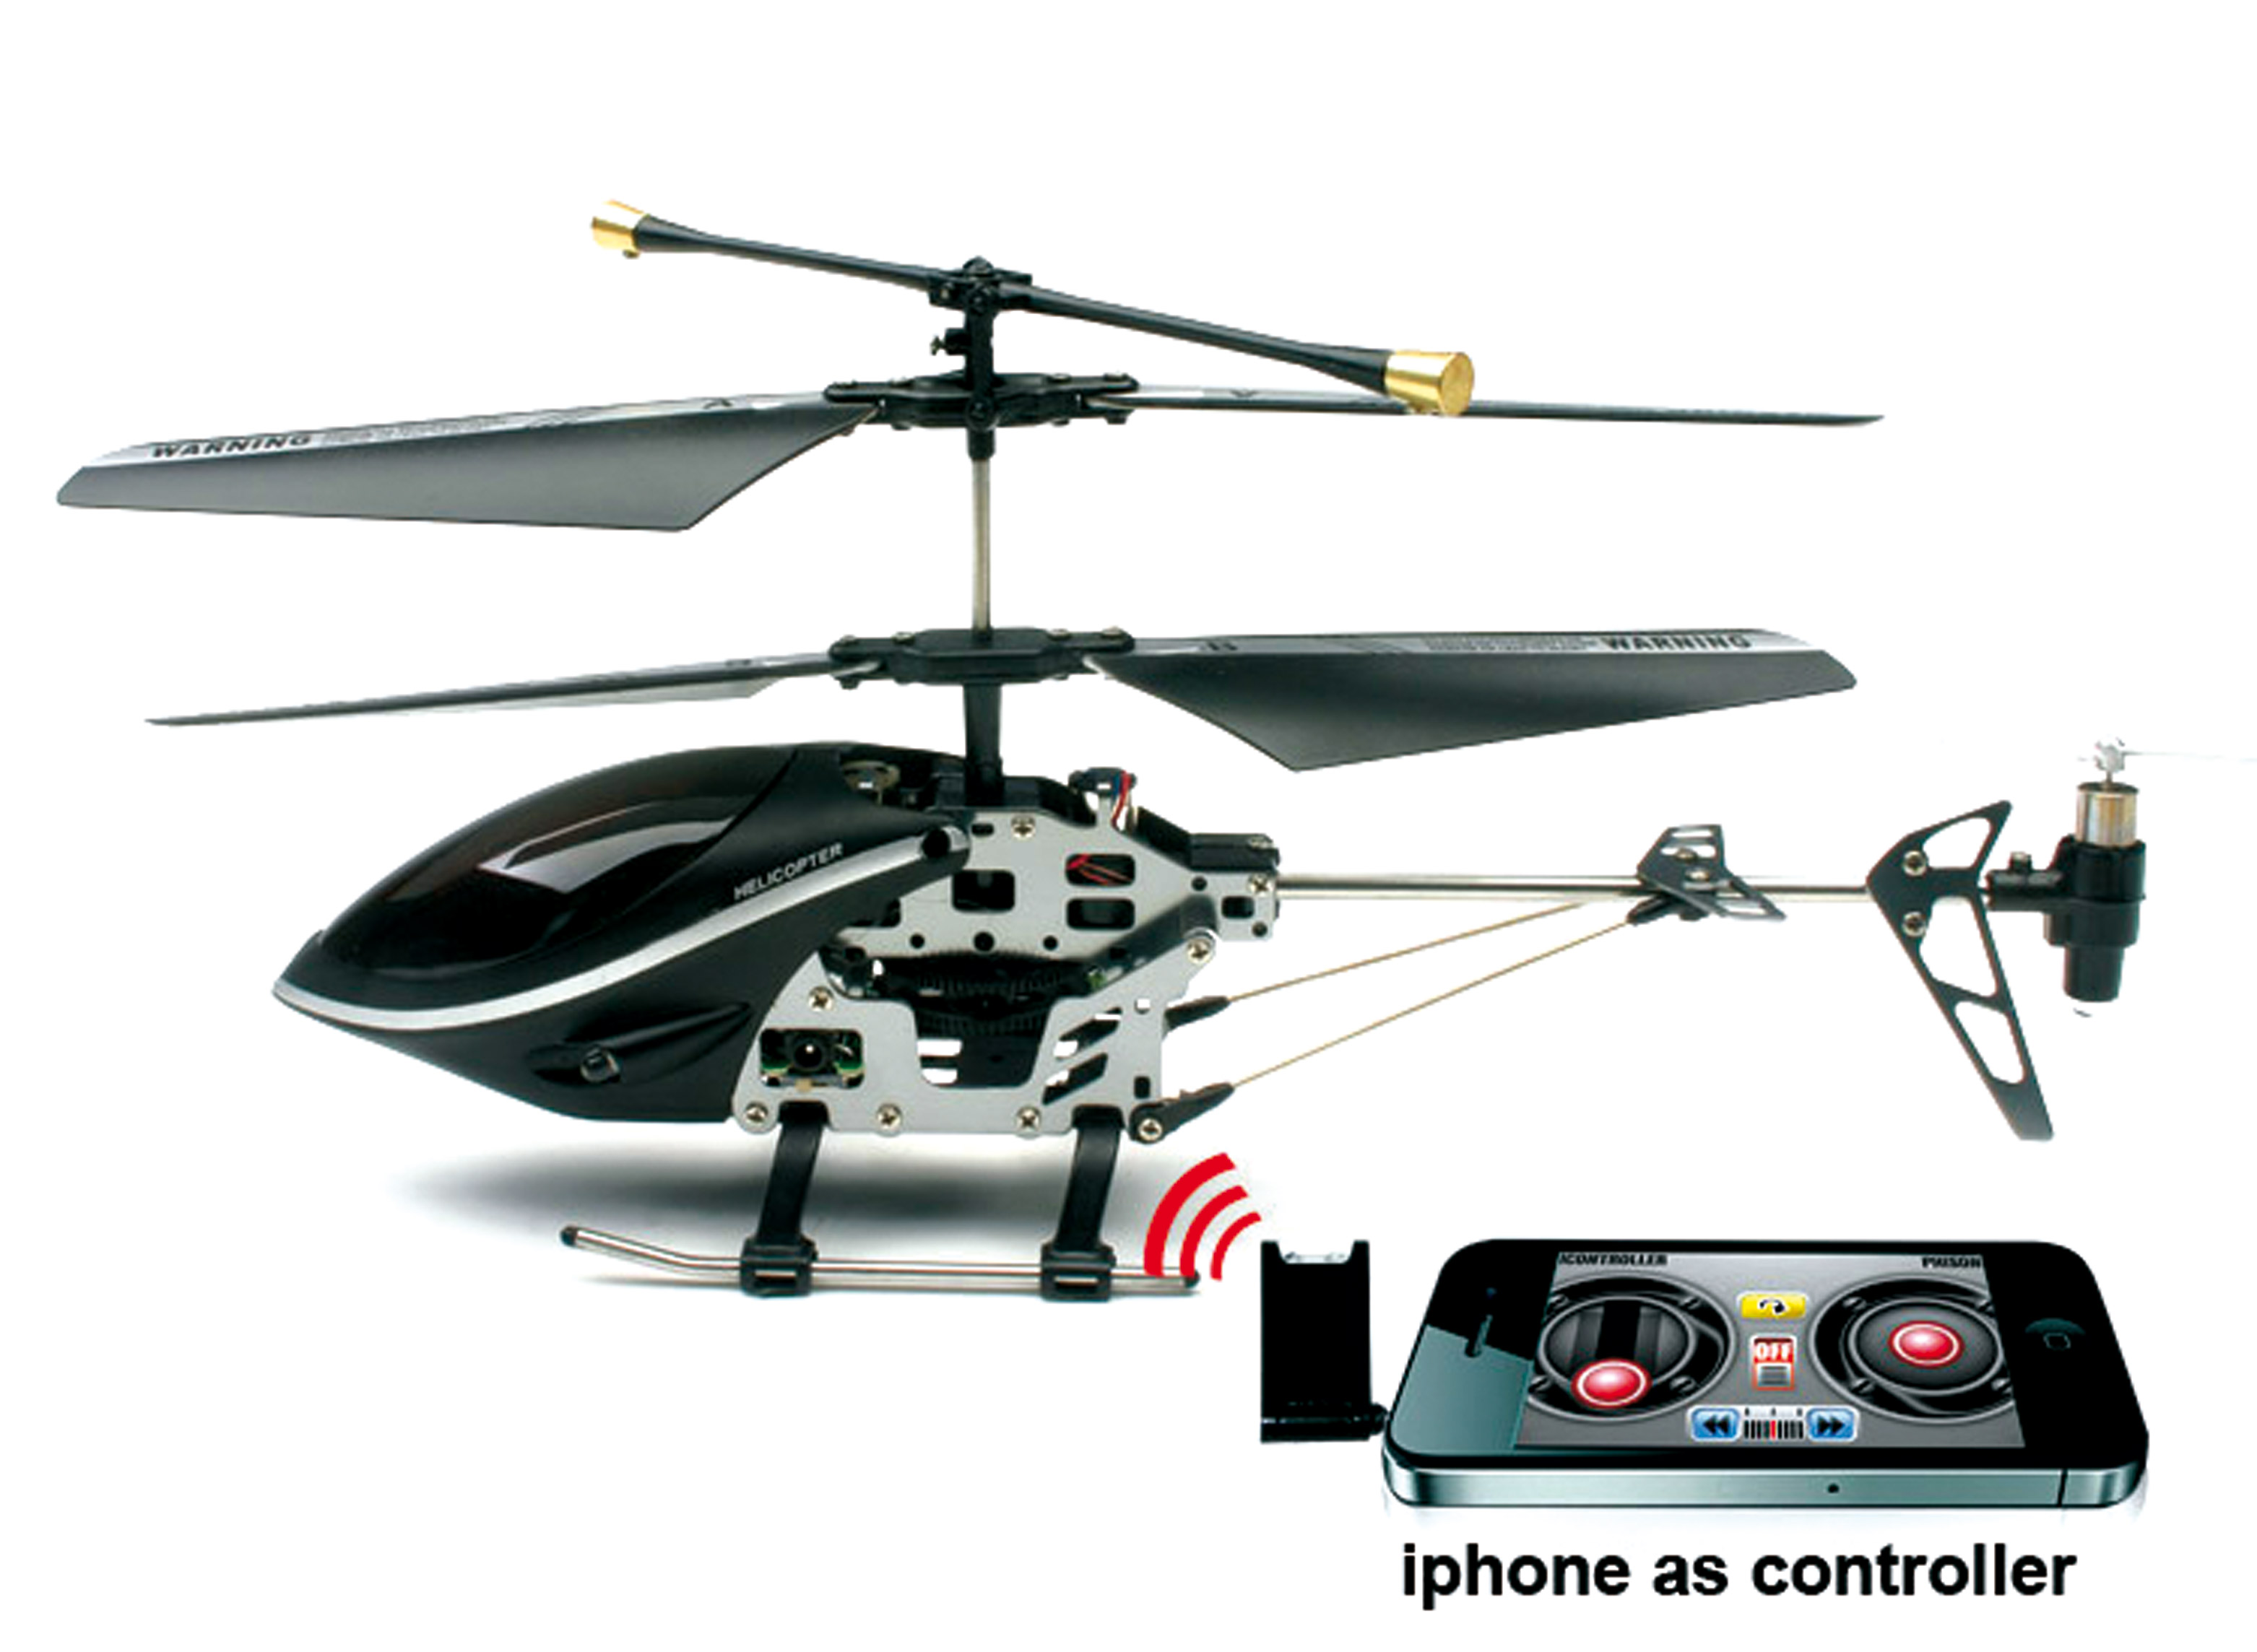 Helicoptero Iphone/Android 3,5 canales